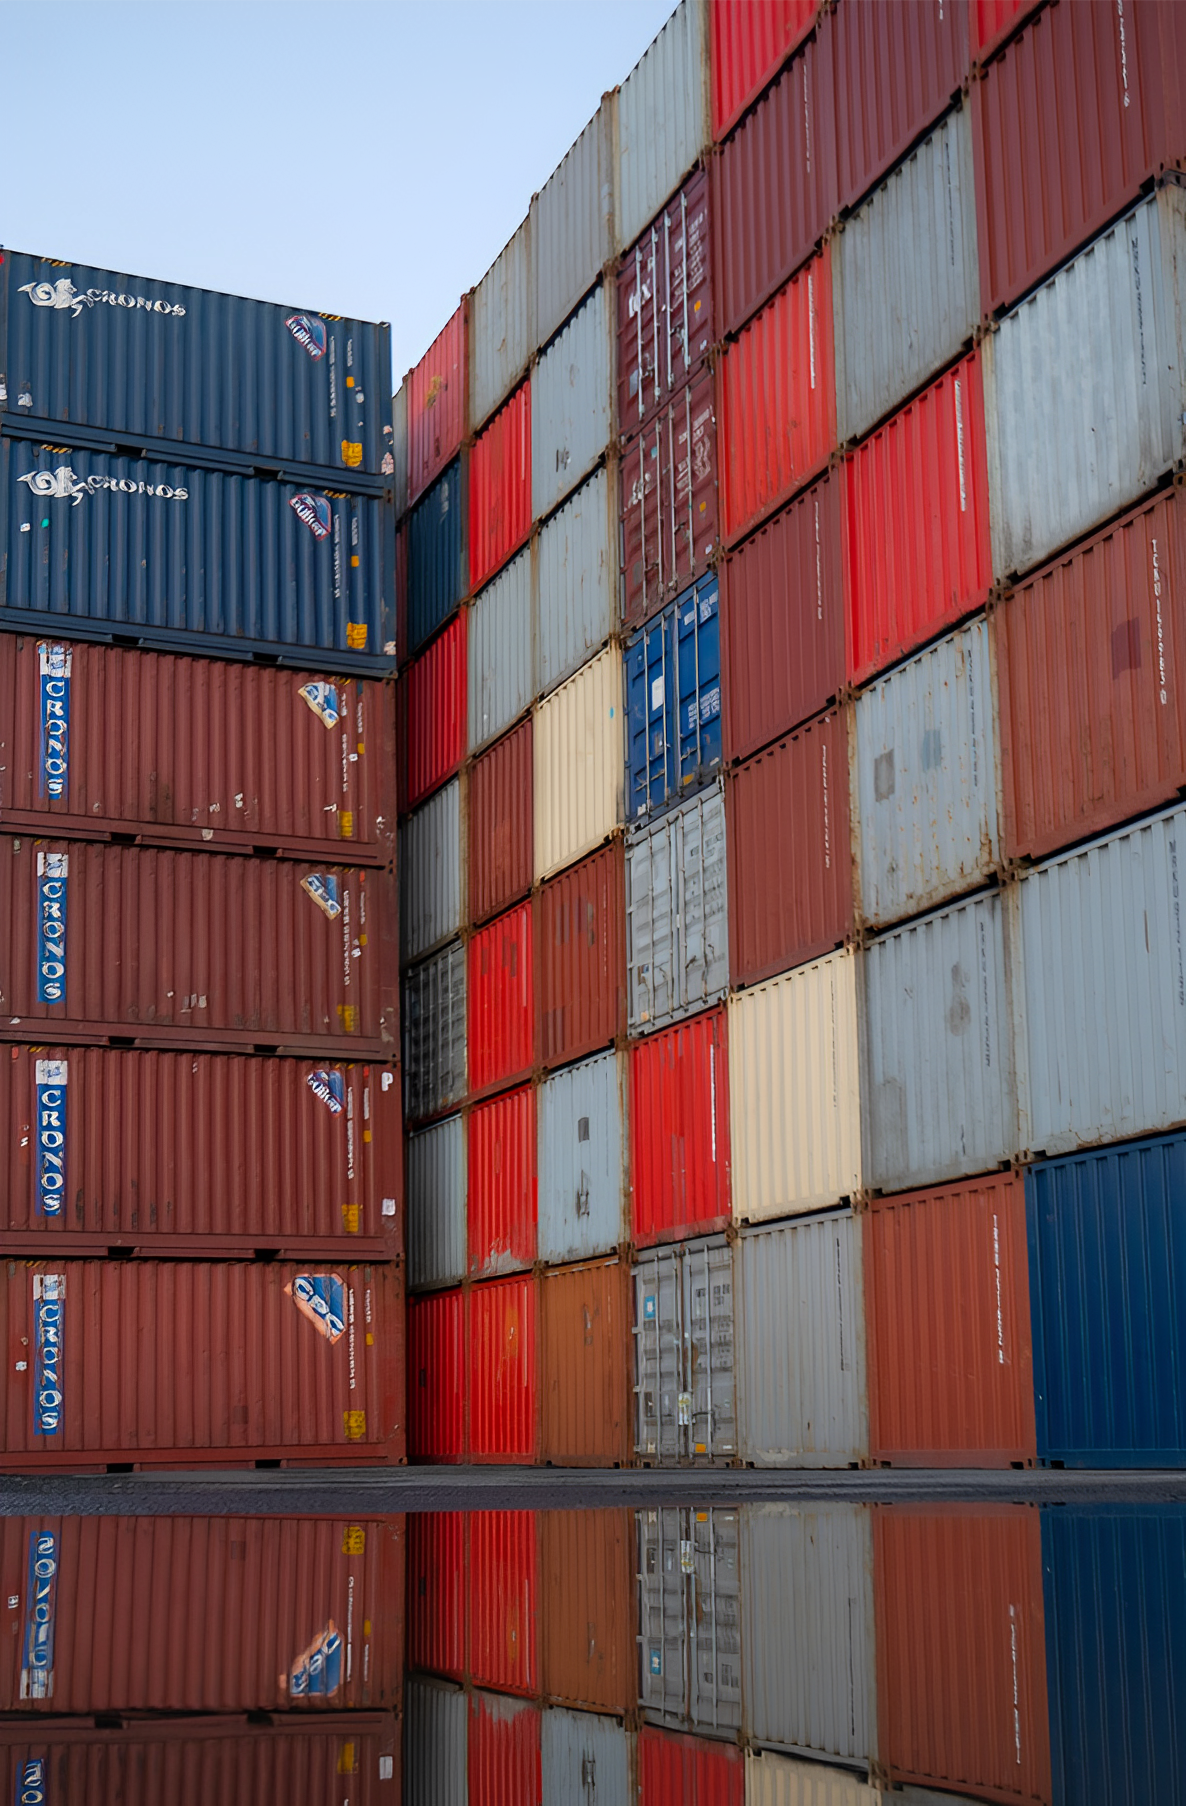 Image of containers in a port